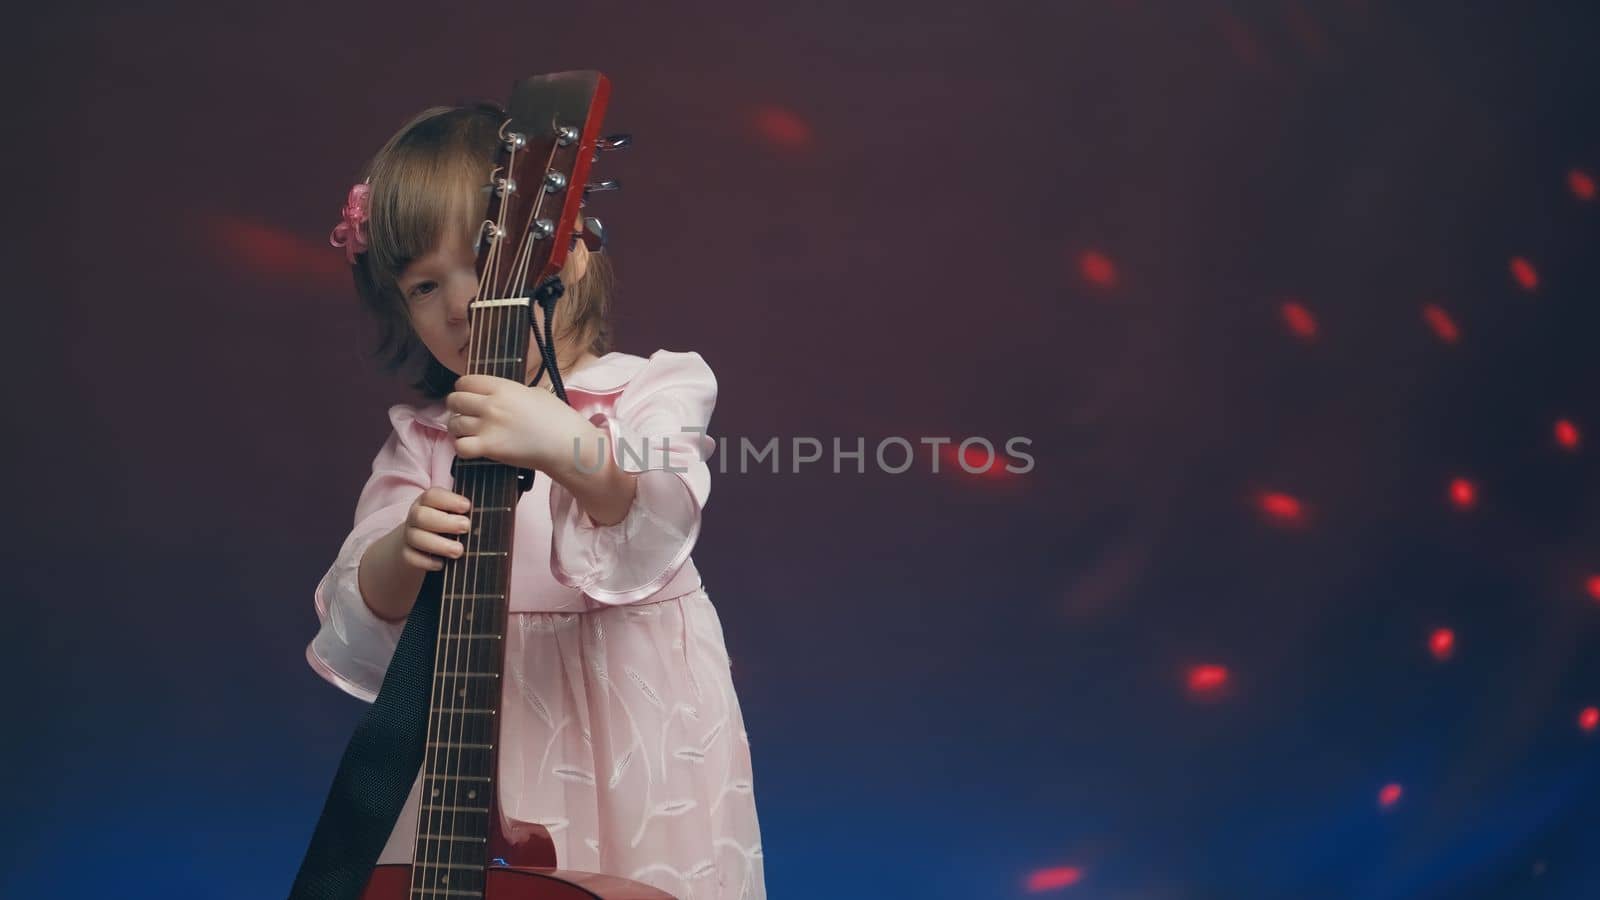 Cute little girl stands on stage in vintage dress and plays an acoustic guitar like a counter bass or cello. The concept of performing the author jazz and blues music. Hobbies and art among children